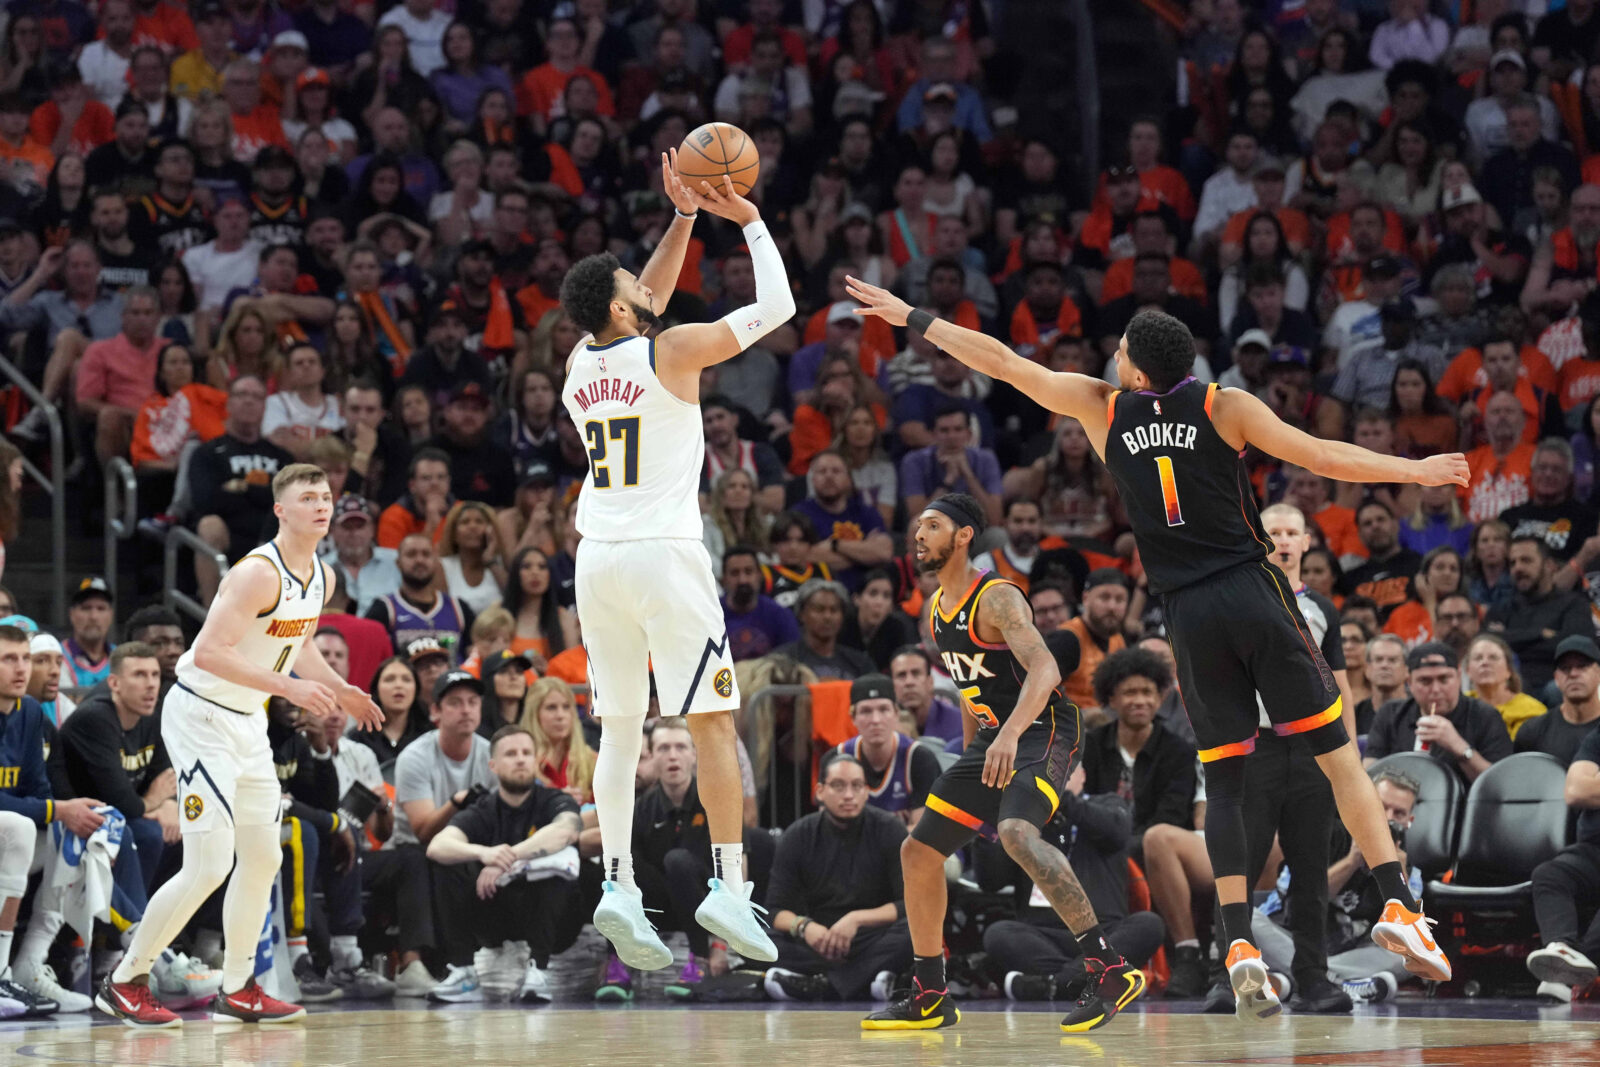 Nuggets rout Lakers, sending Lebron James and fans home with a big